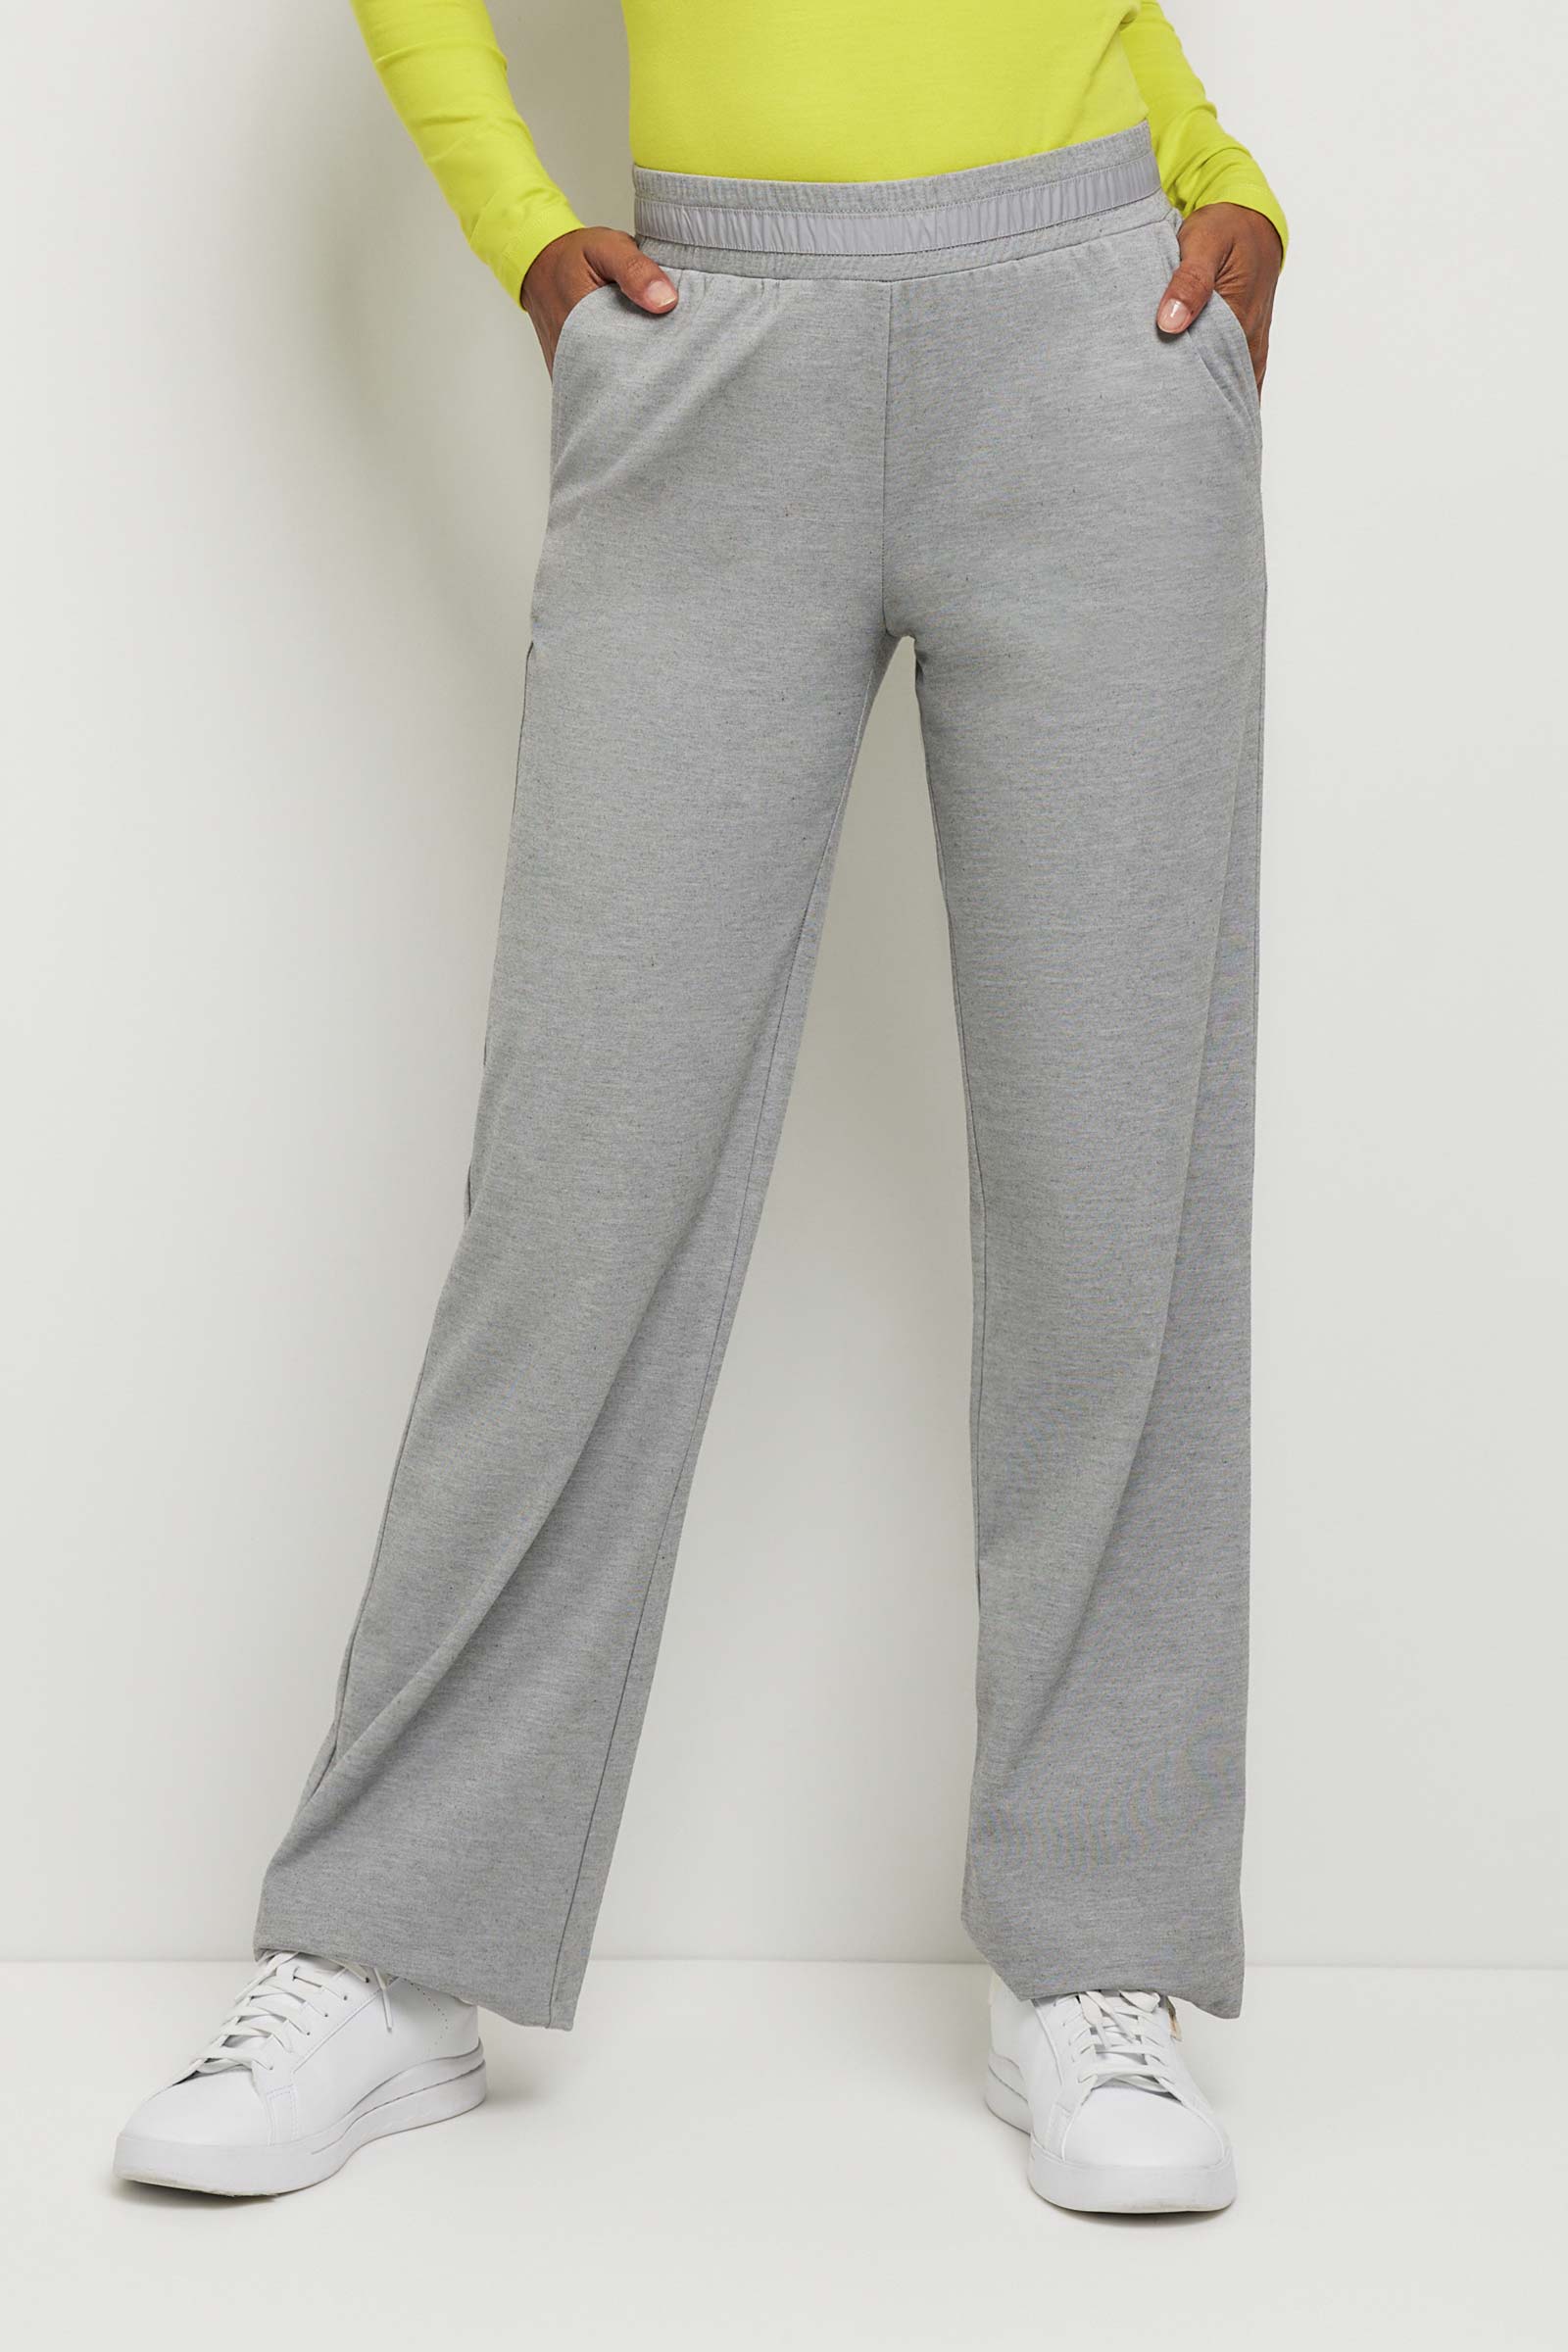 EVERYDAY TRAVEL TROUSERS M'S 5044 - Pinewood